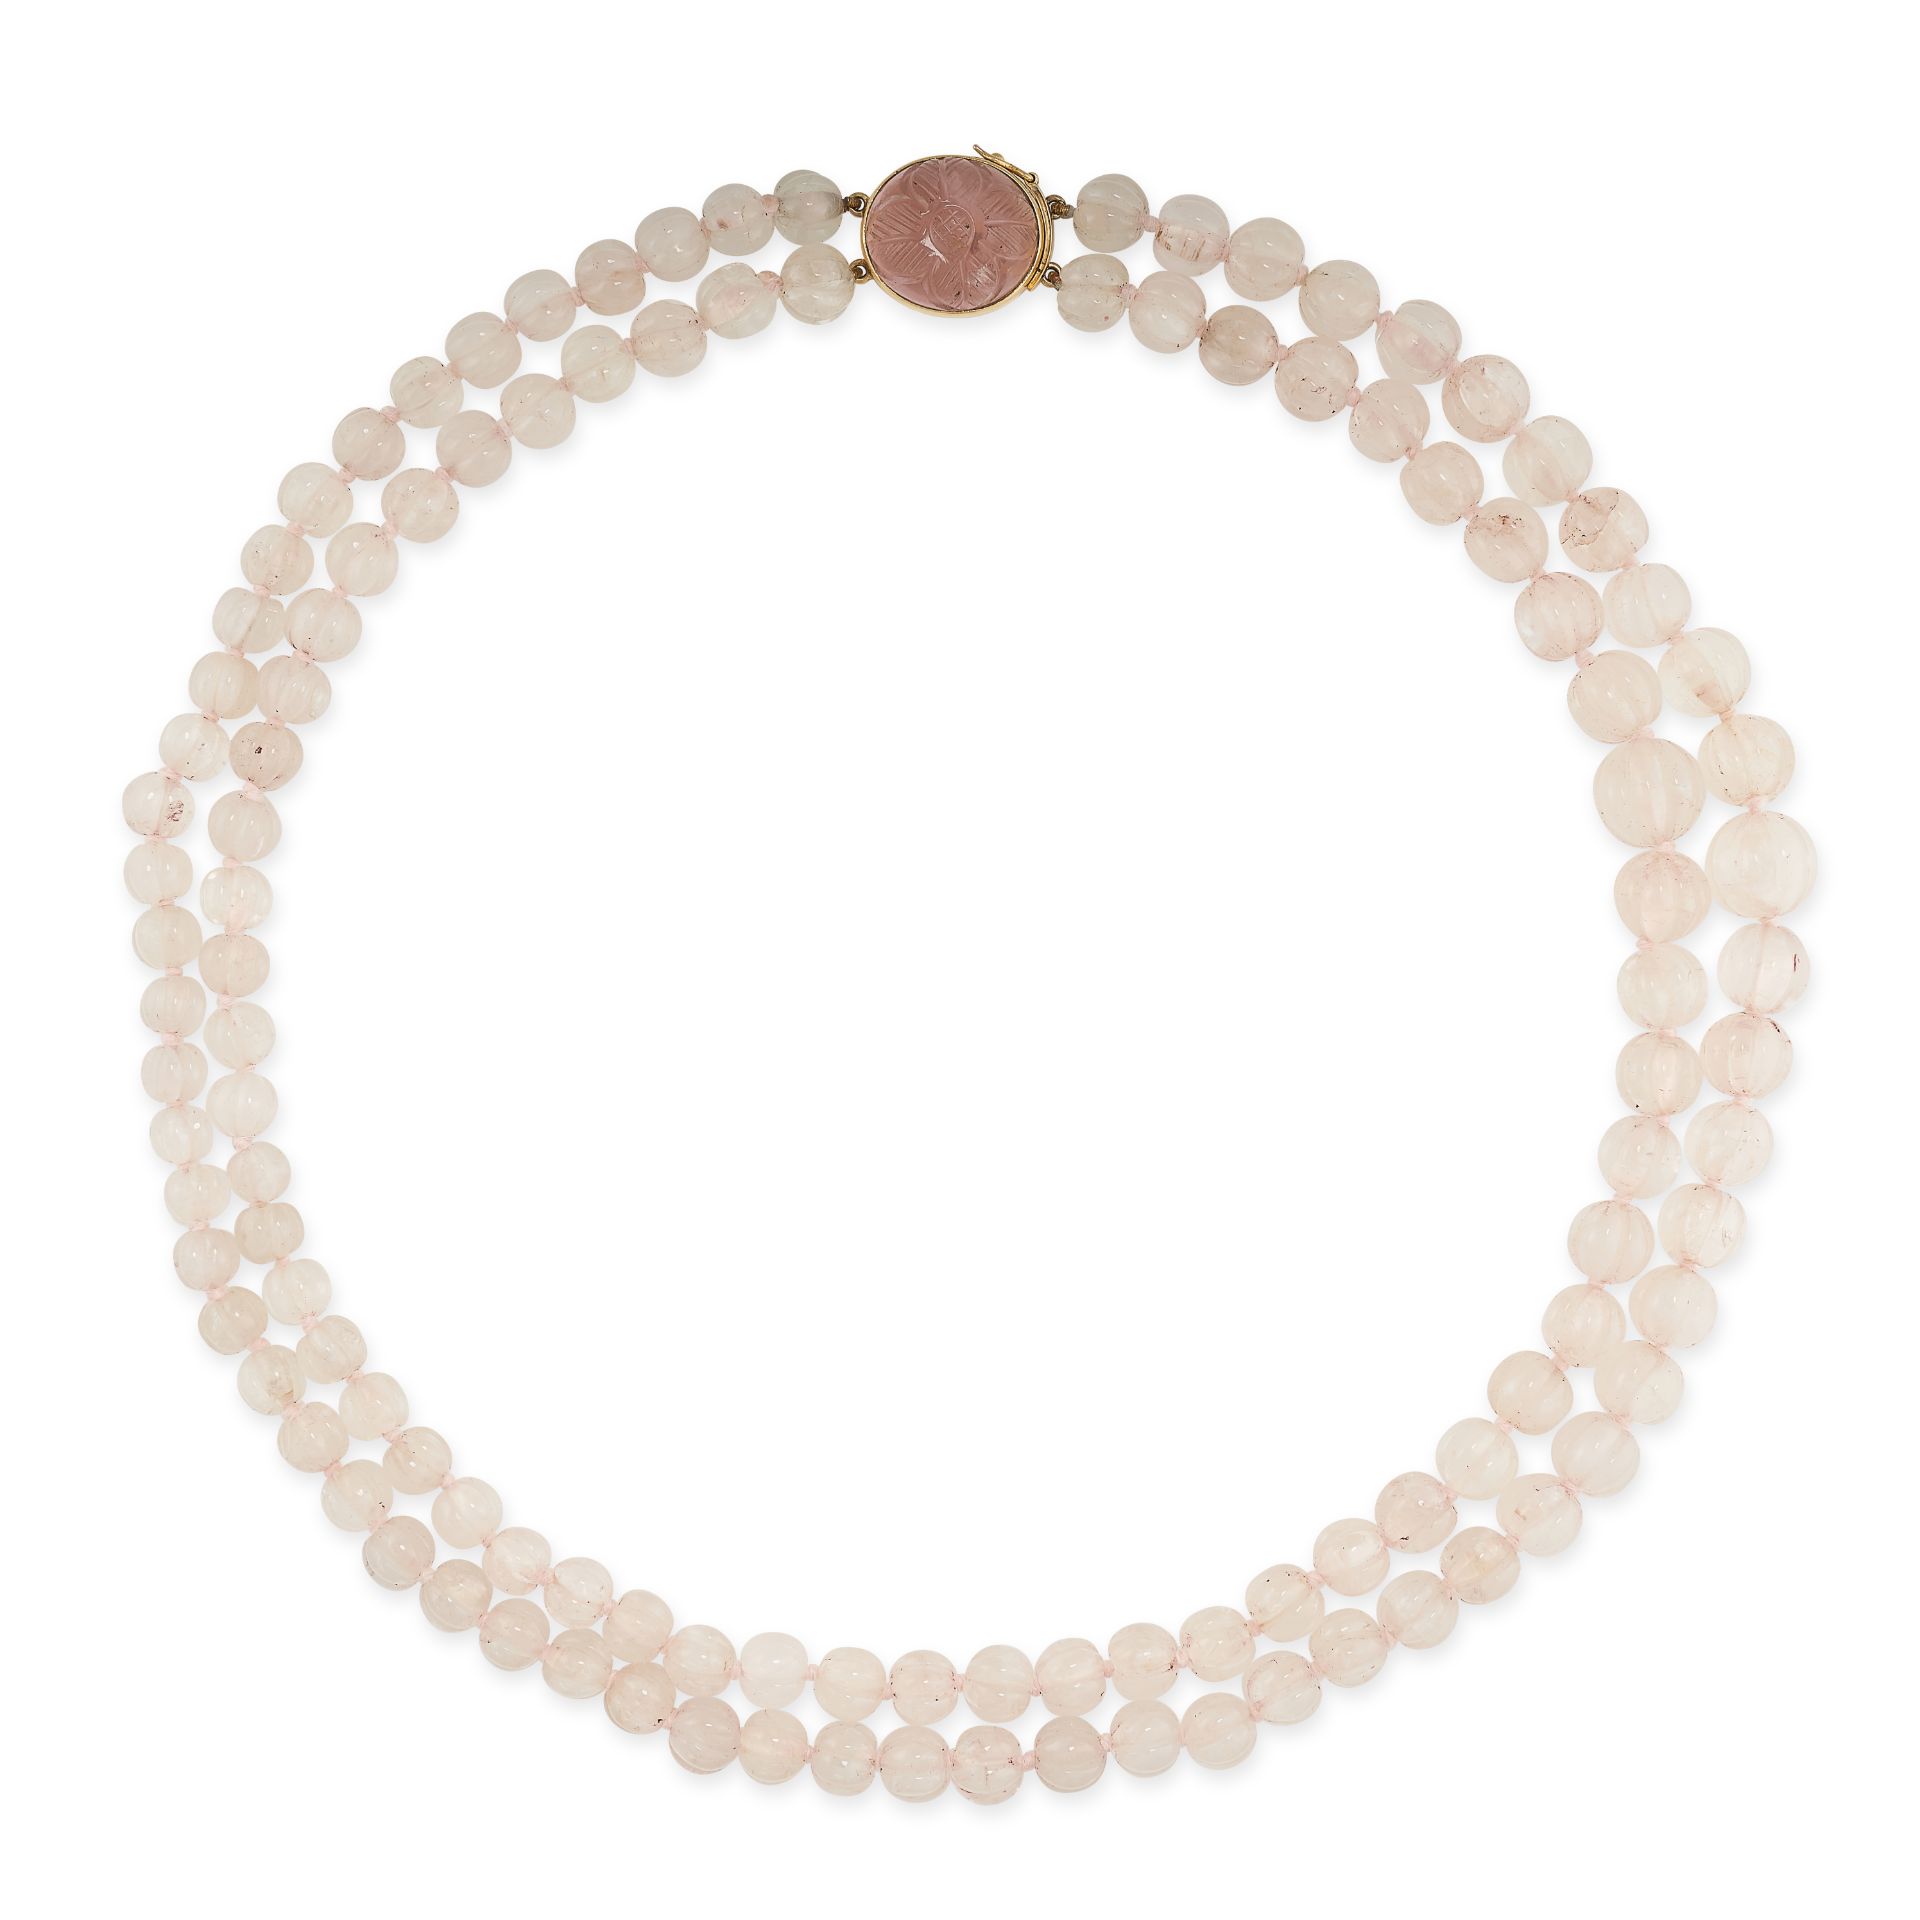 A CARVED ROSE QUARTZ BEAD NECKLACE in 18 carat yellow gold, comprising two rows of graduated